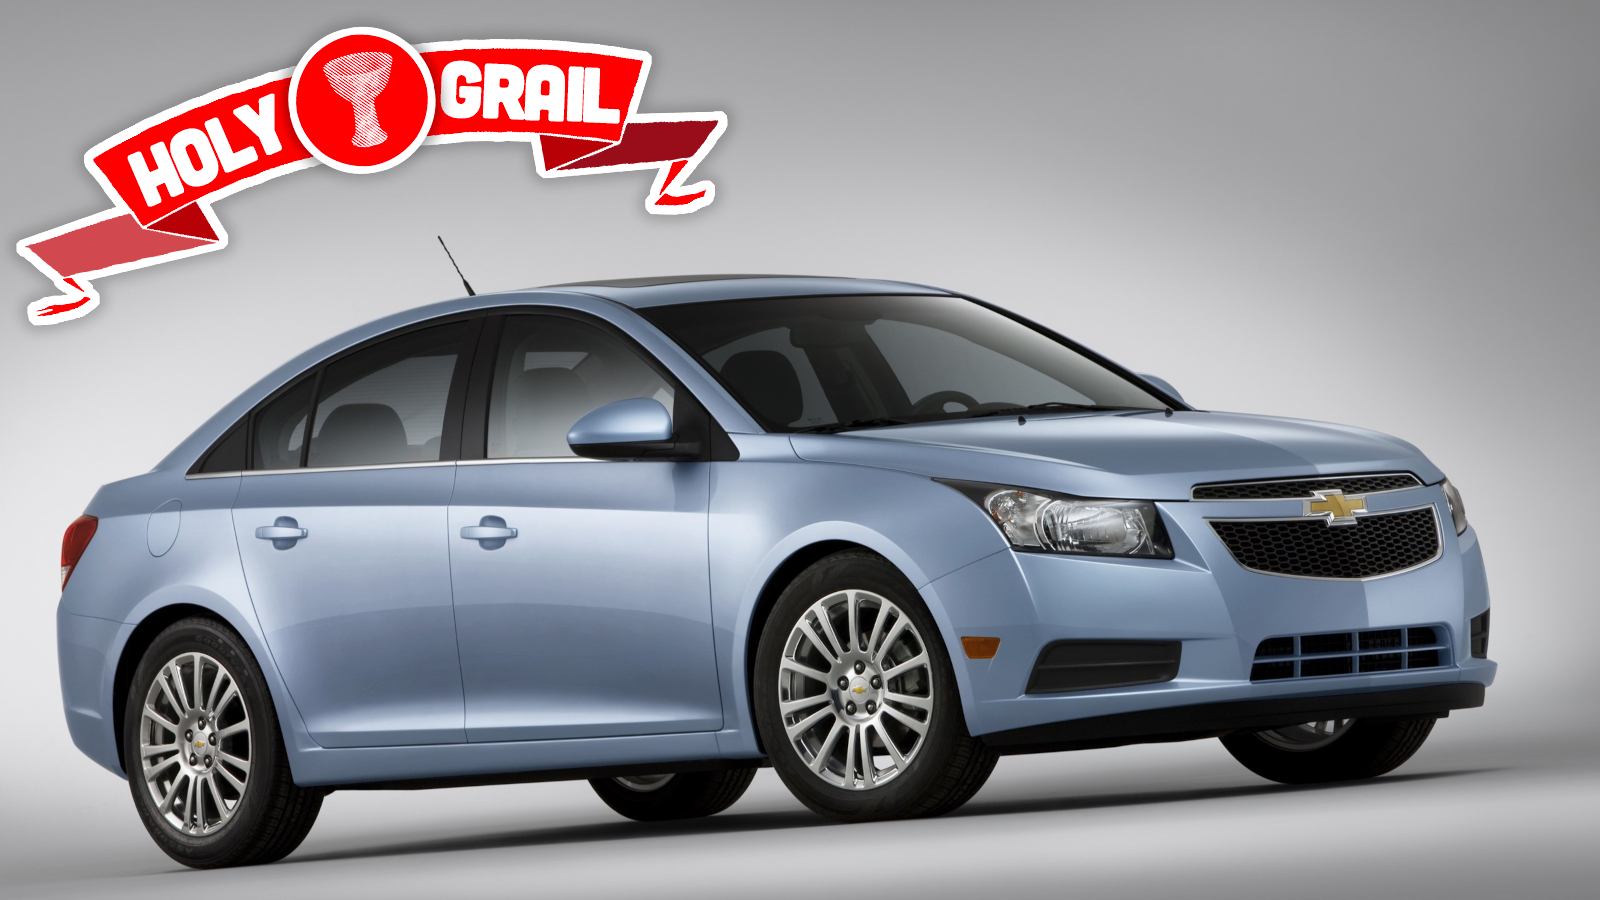 Holy Grails: The First-Generation Chevy Cruze Is Arguably One Of GM's Most  Important Cars - The Autopian